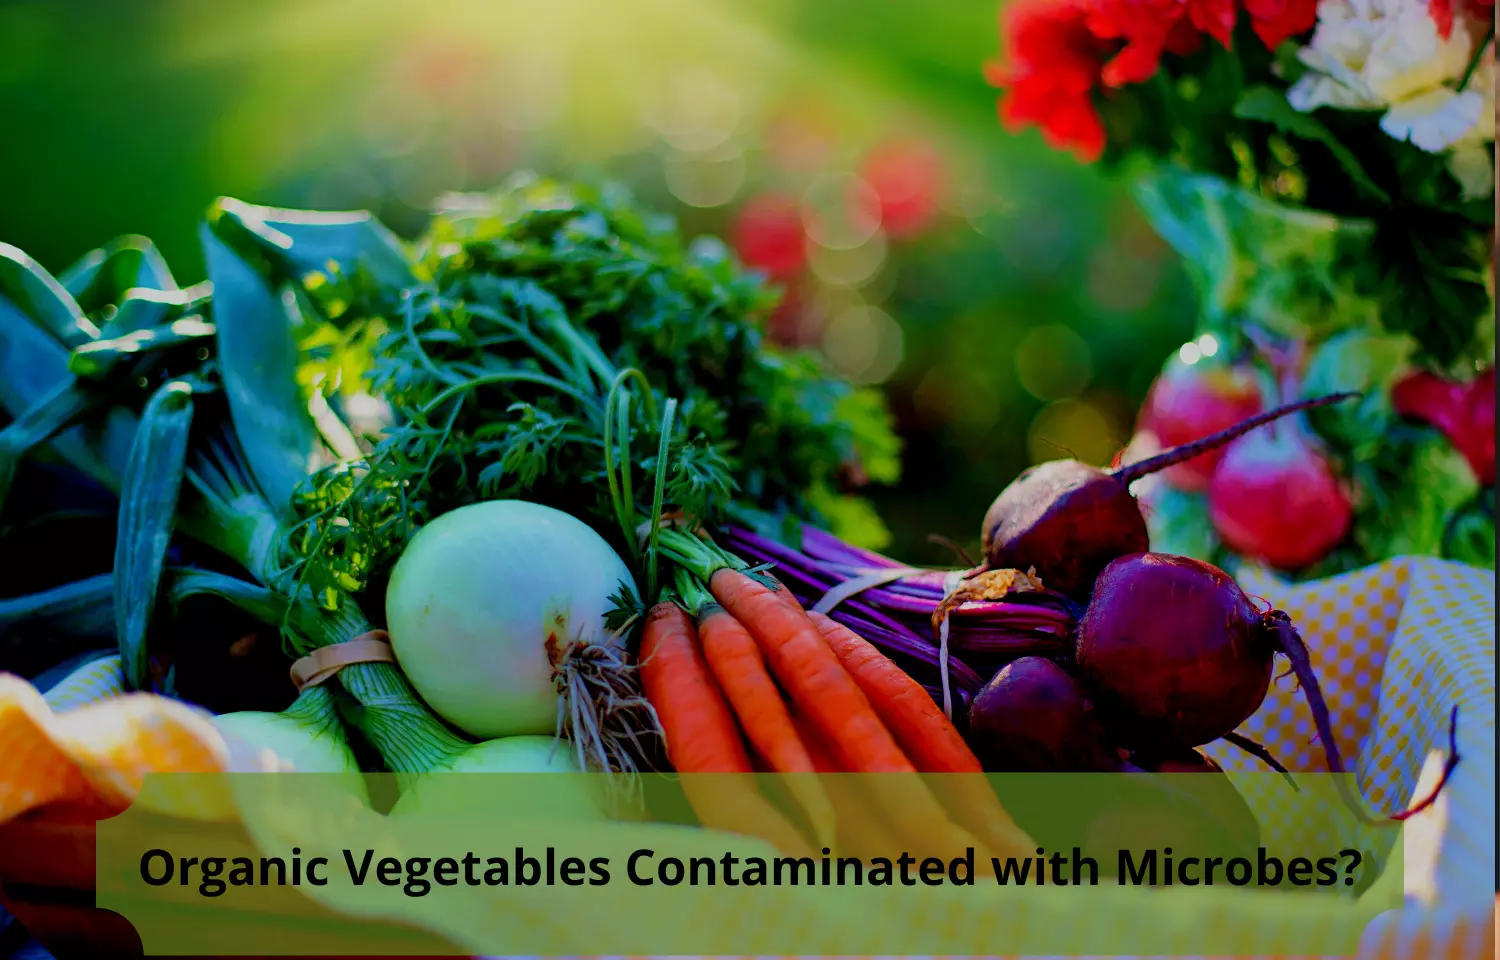 Journal Club - Organic Vegetables are Contaminated with Microbes